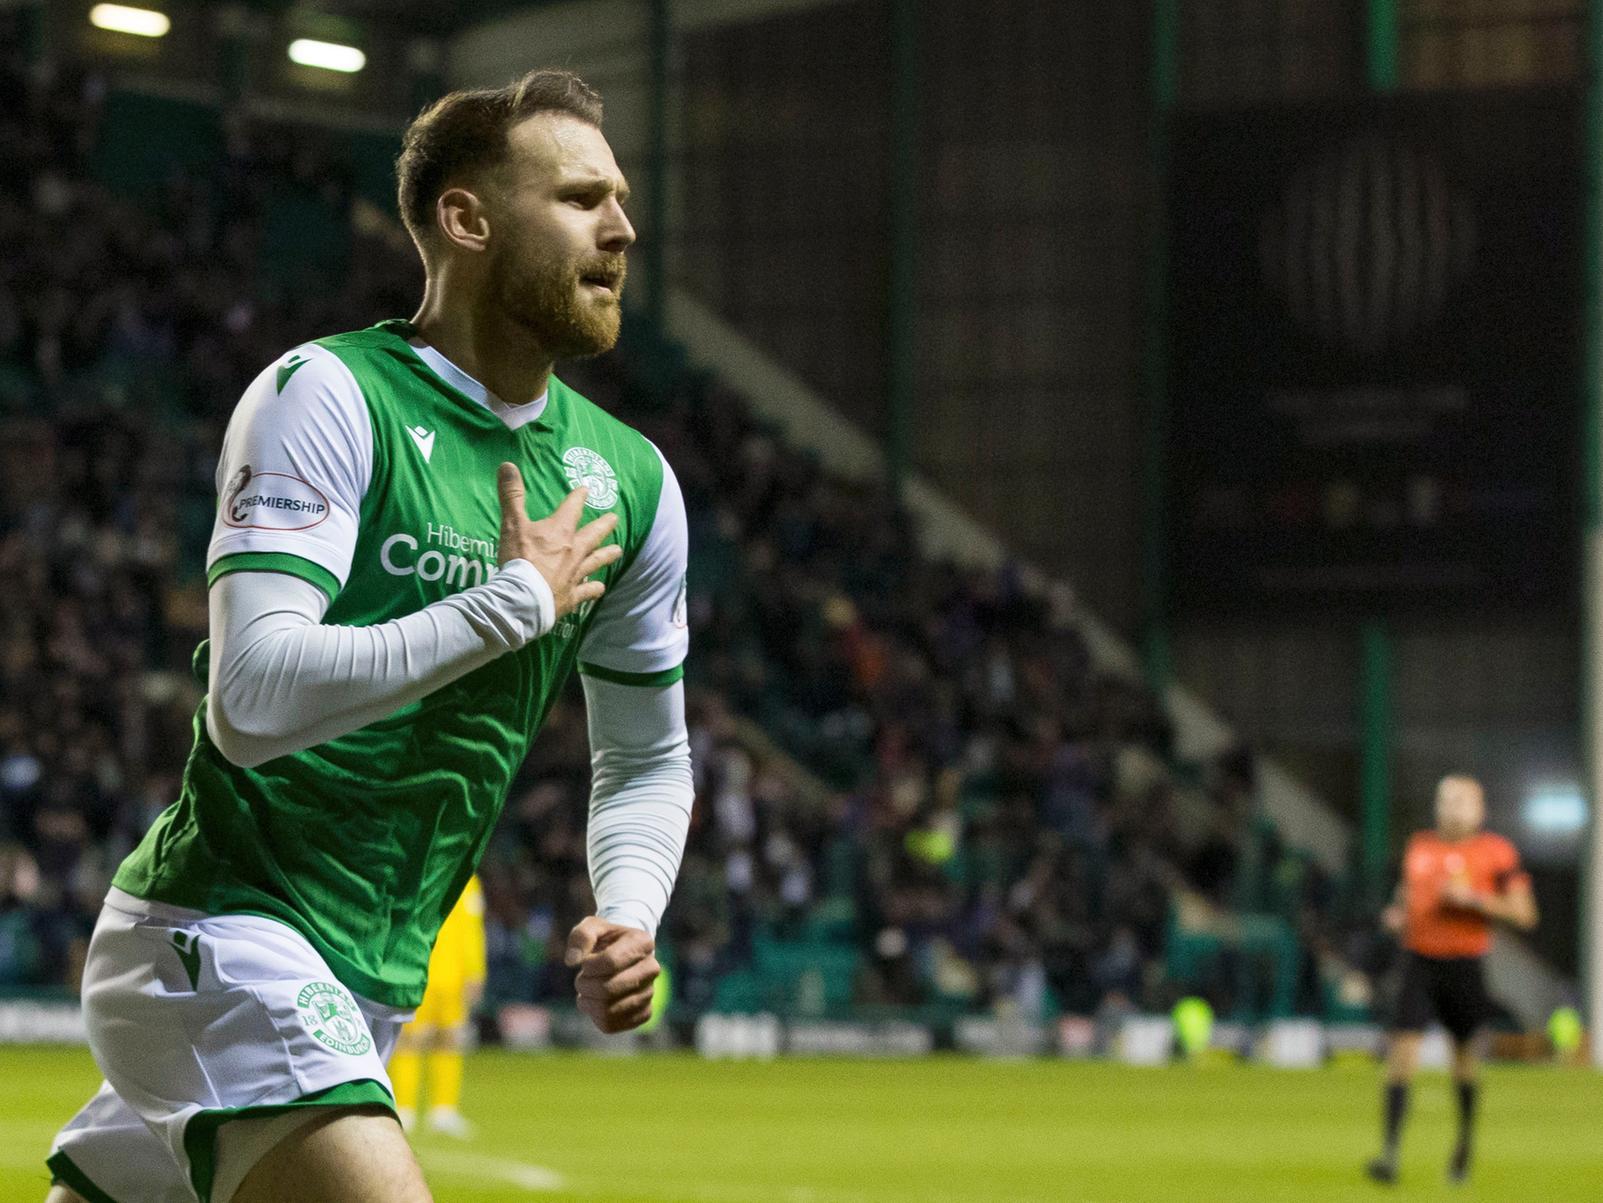 Added some pace as Hibs tried to counter but missed glaring chance at 3-1.